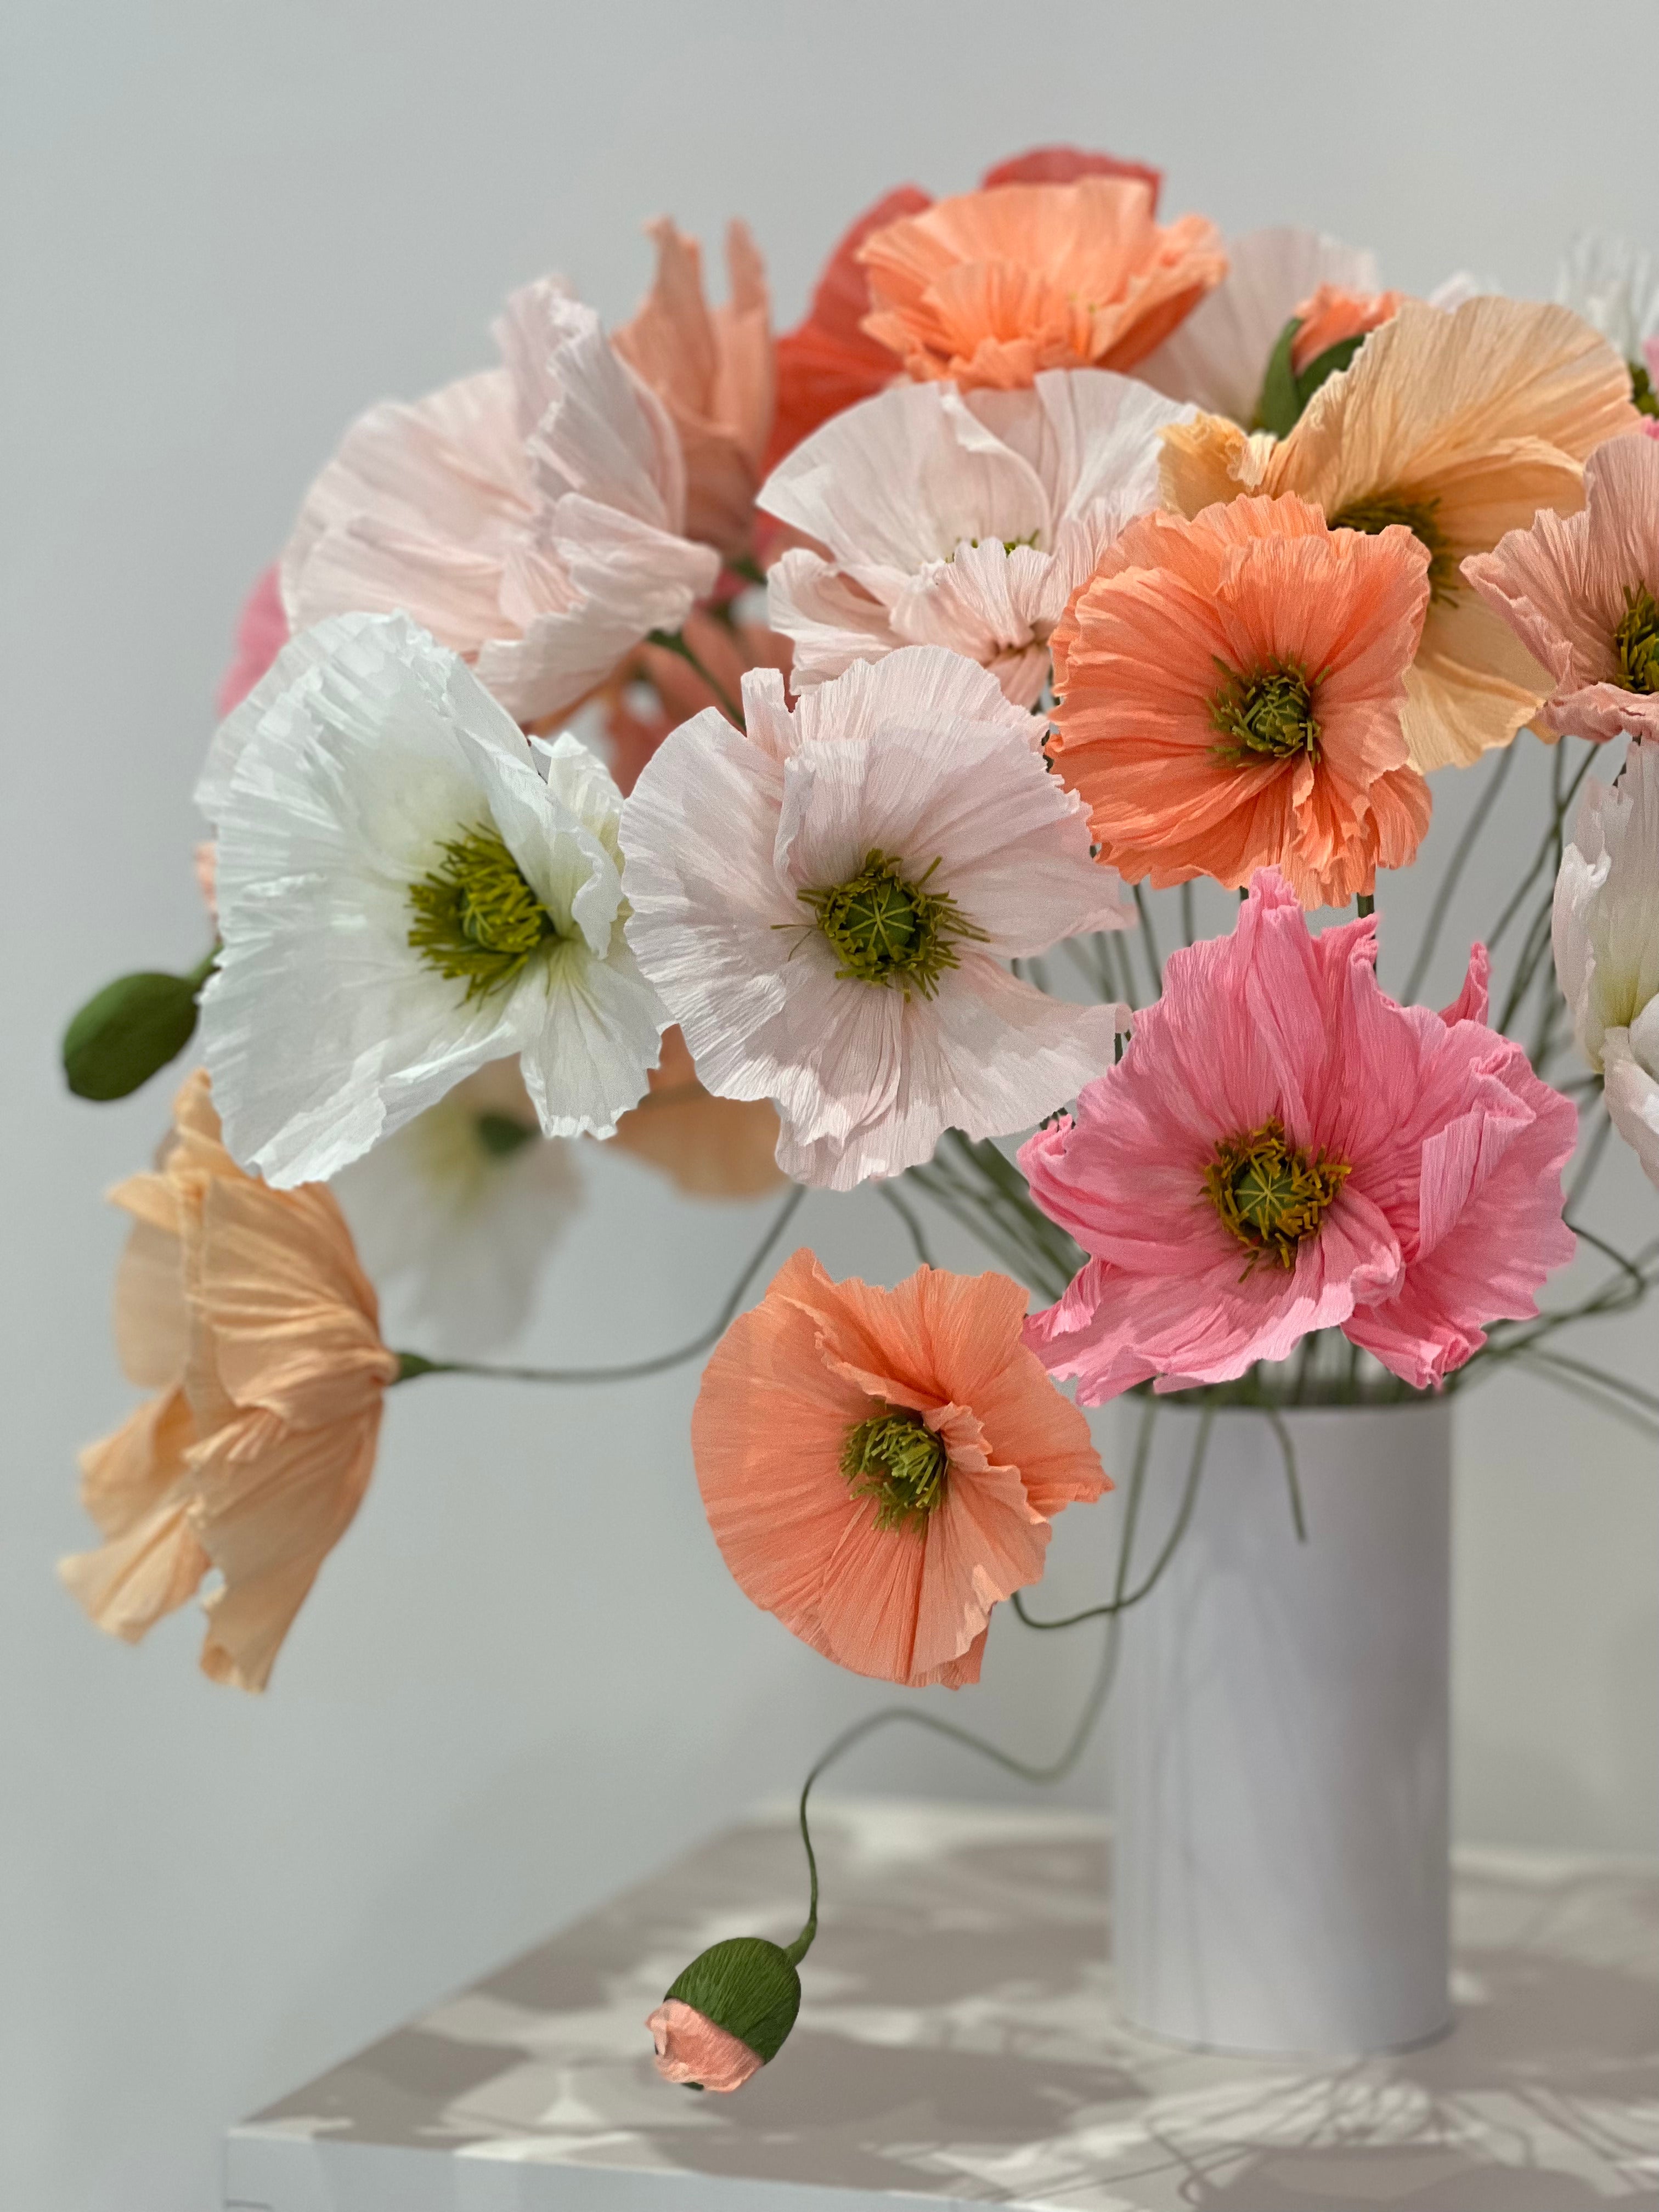 A captivating arrangement of paper poppies, with each bloom displaying intricate details and lifelike textures.